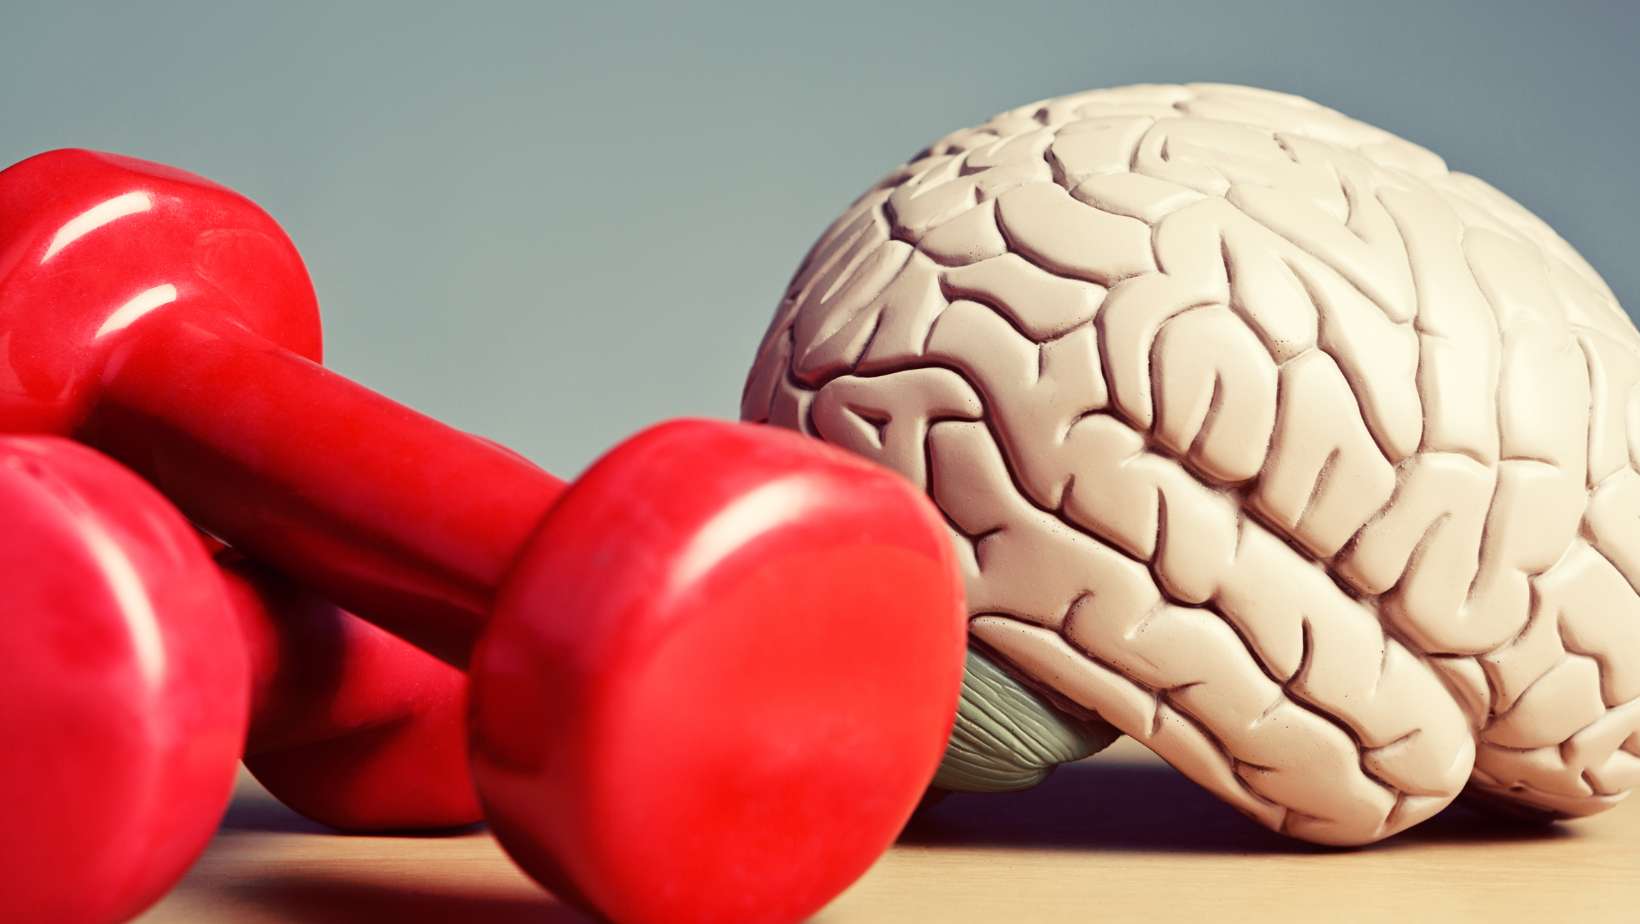 A model brain sits next to exercise weights. Metaphor for heavyweight intellects